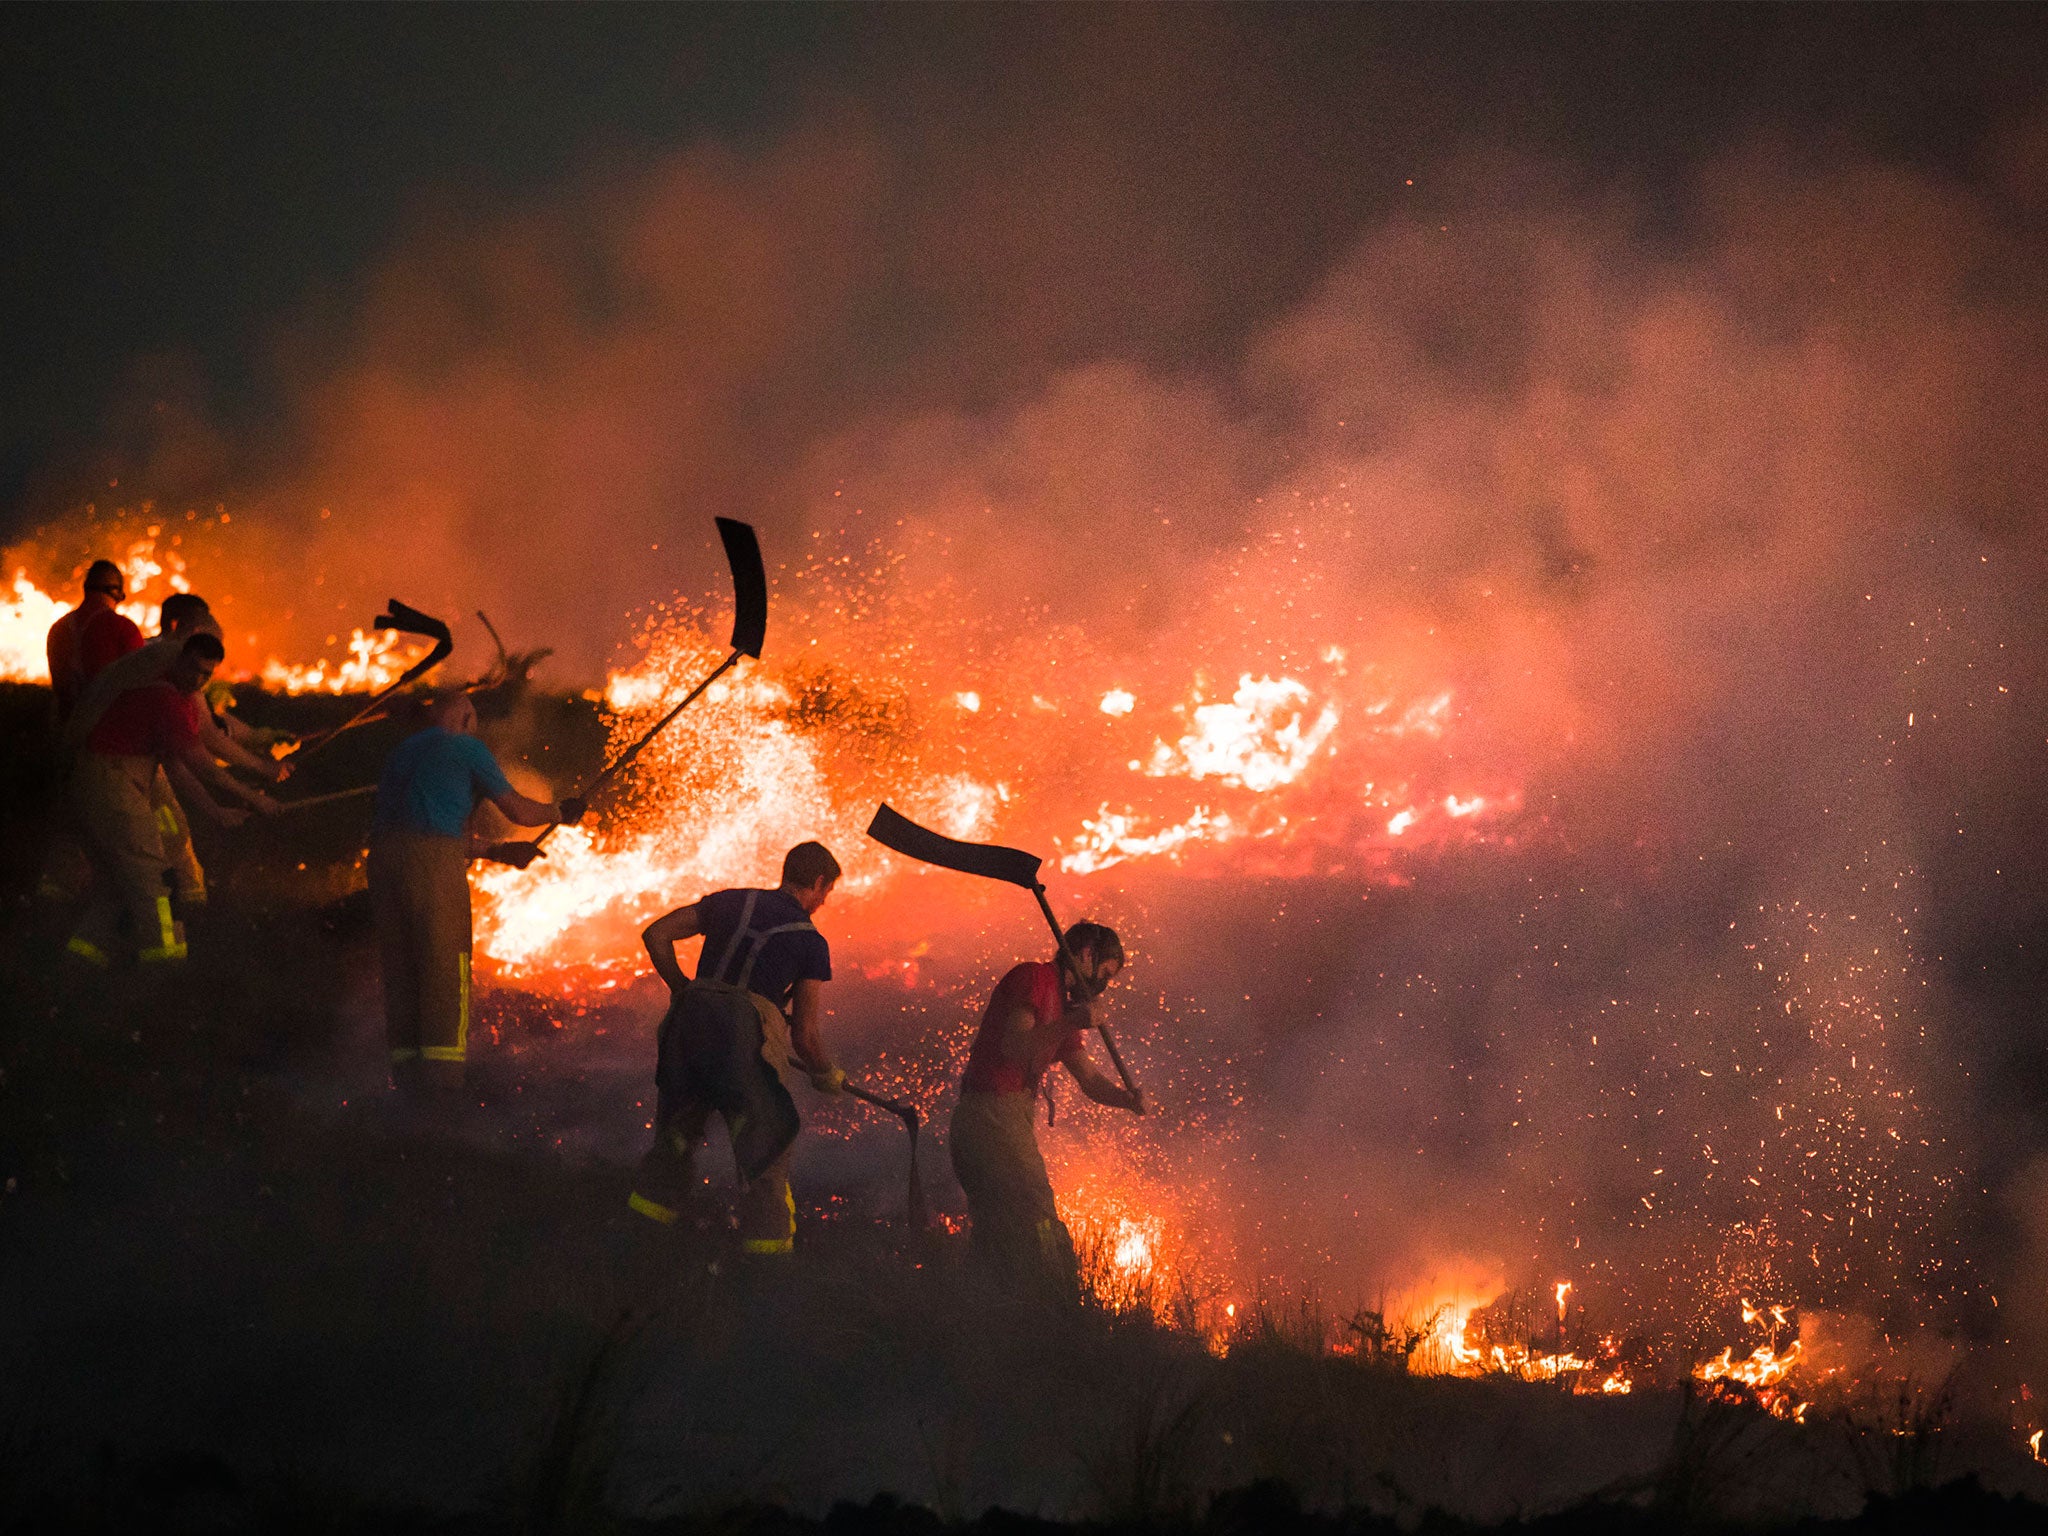 A record-breaking series of wildfires raged across the UK this summer following driest June on record for some parts of the country